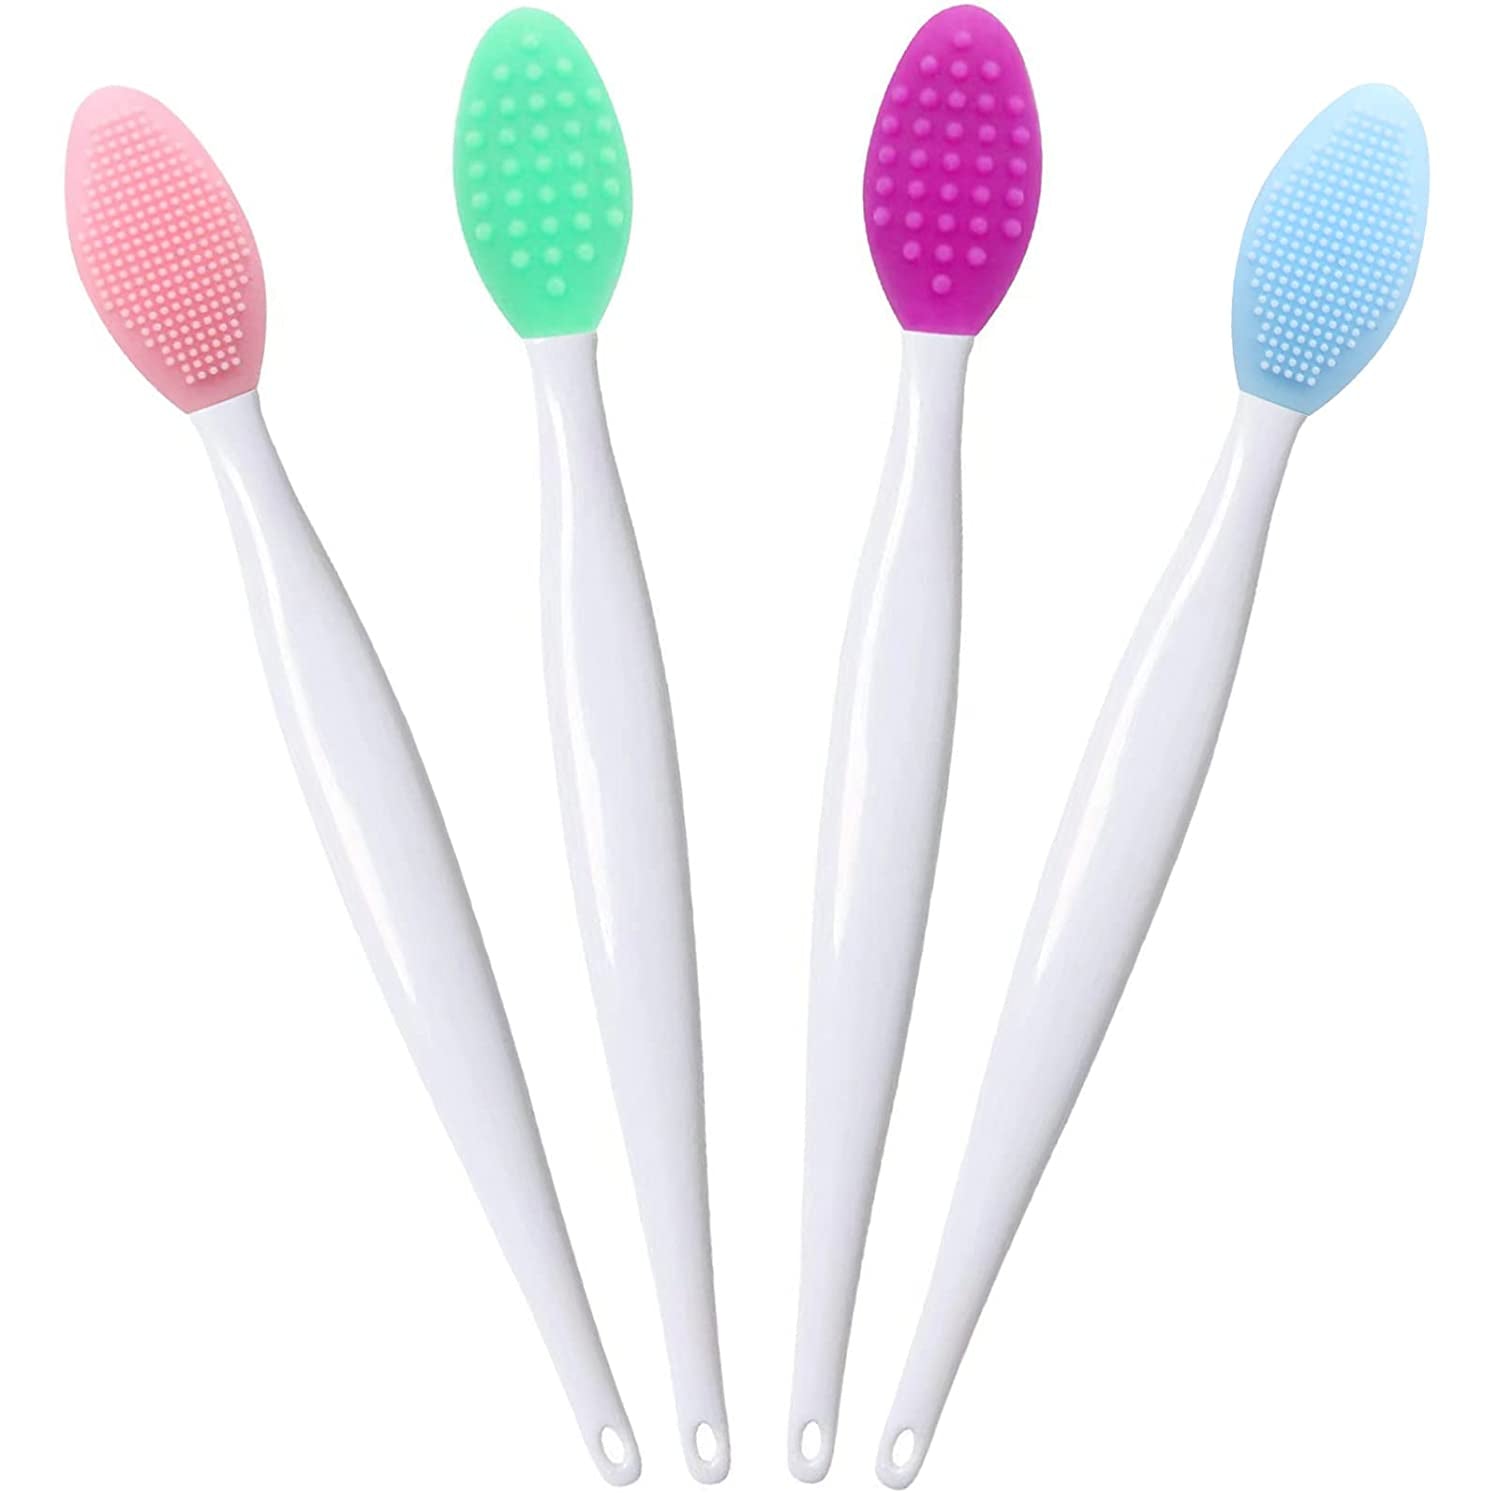 Lip Scrub Brush Lip Brush Tool,Double-Sided Silicone Exfoliating Lip Brush,Gentle Lip Exfoliator Scrubber Brush for Smooth,Soft,Bright,and Healthy Lips(2 PCS)